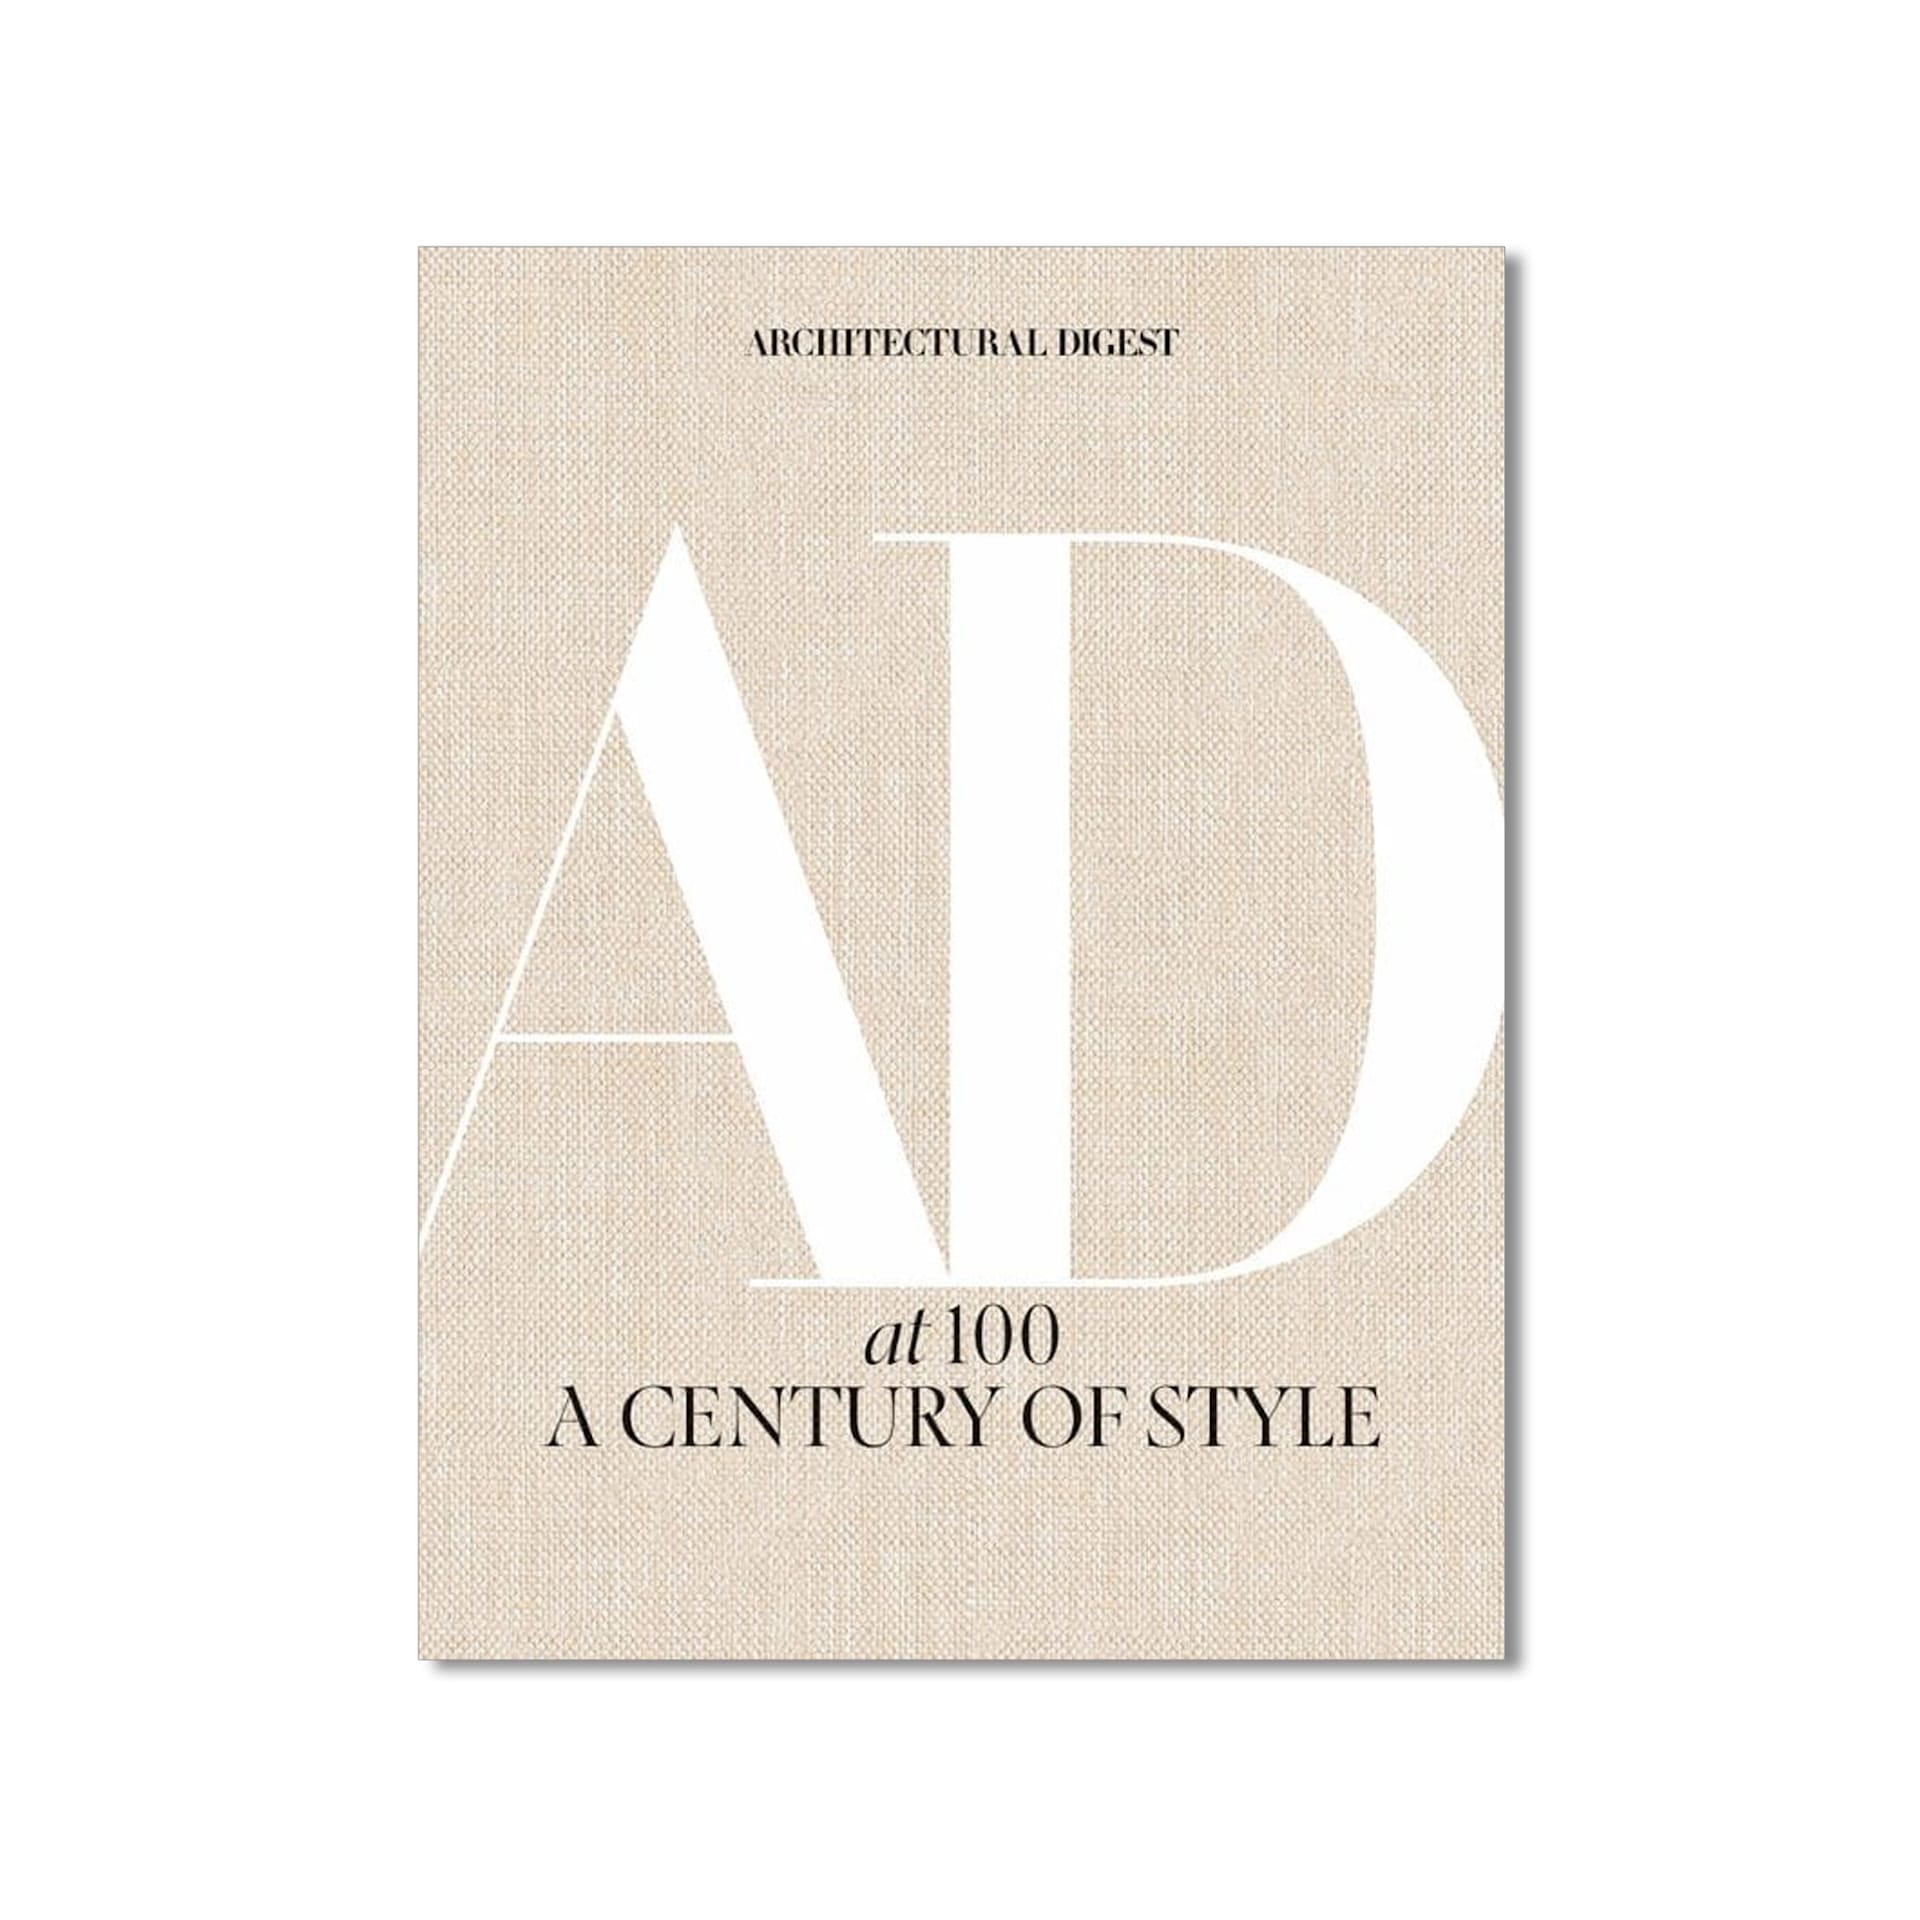 Architectural Digest at 100 – A century of style - New Mags - NO GA